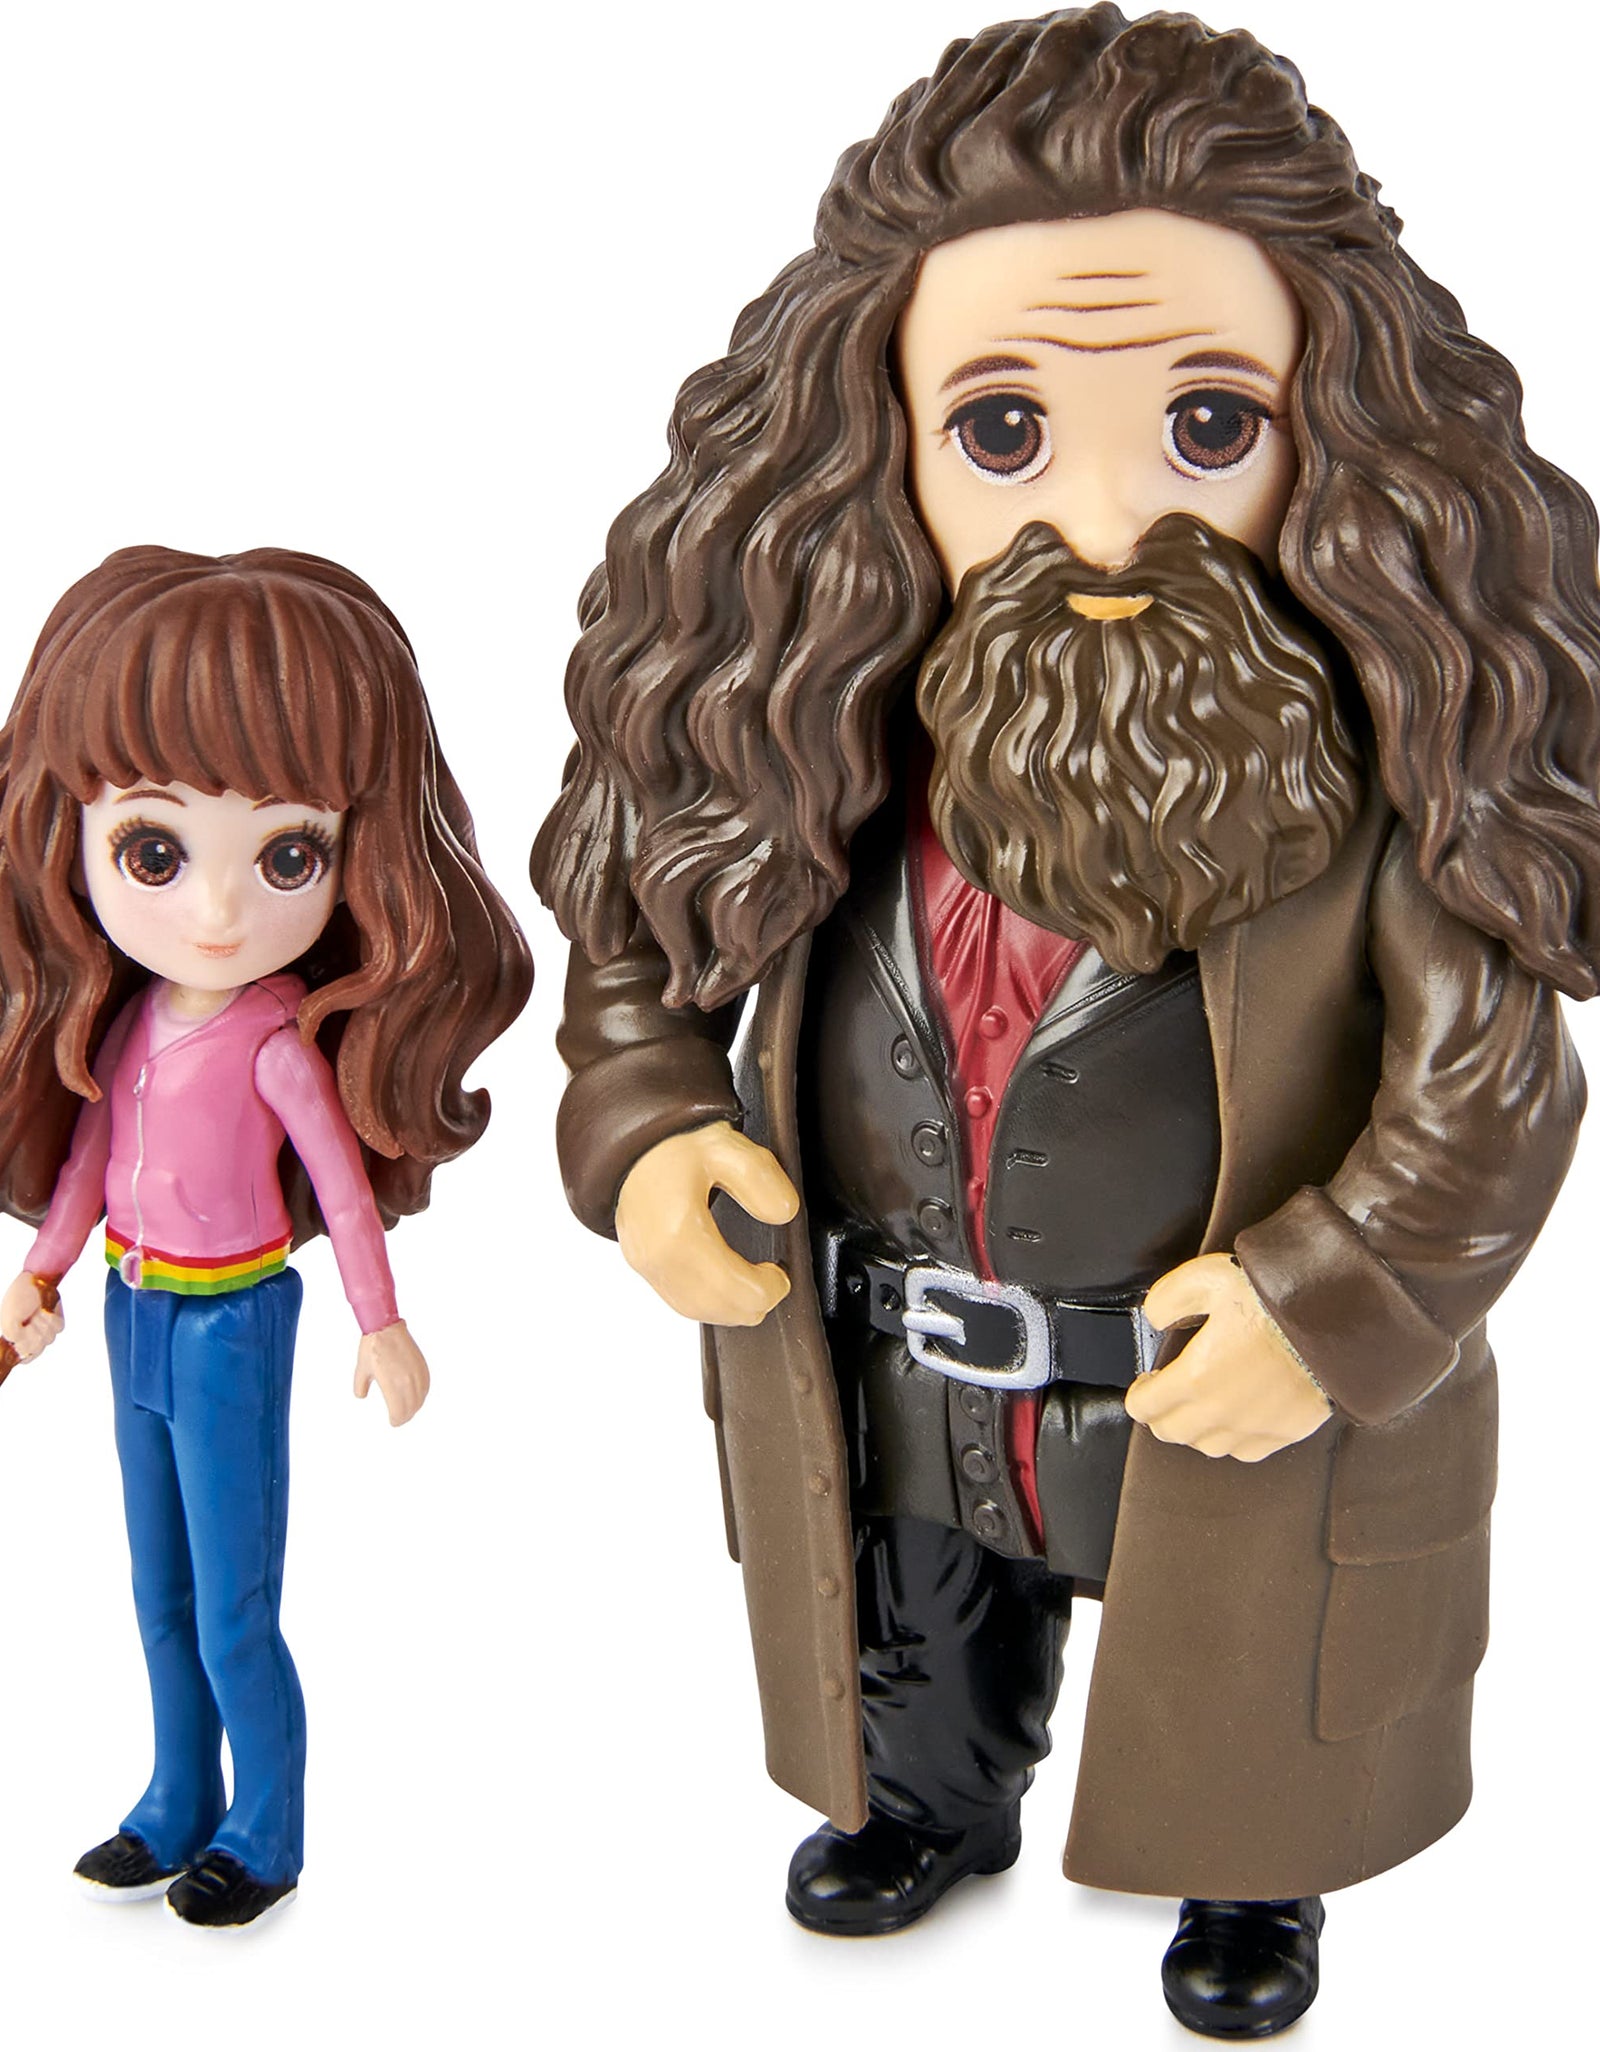 Wizarding World Harry Potter, Magical Minis Hermione and Rubeus Hagrid Friendship Set with Creature, Kids Toys for Ages 5 and up